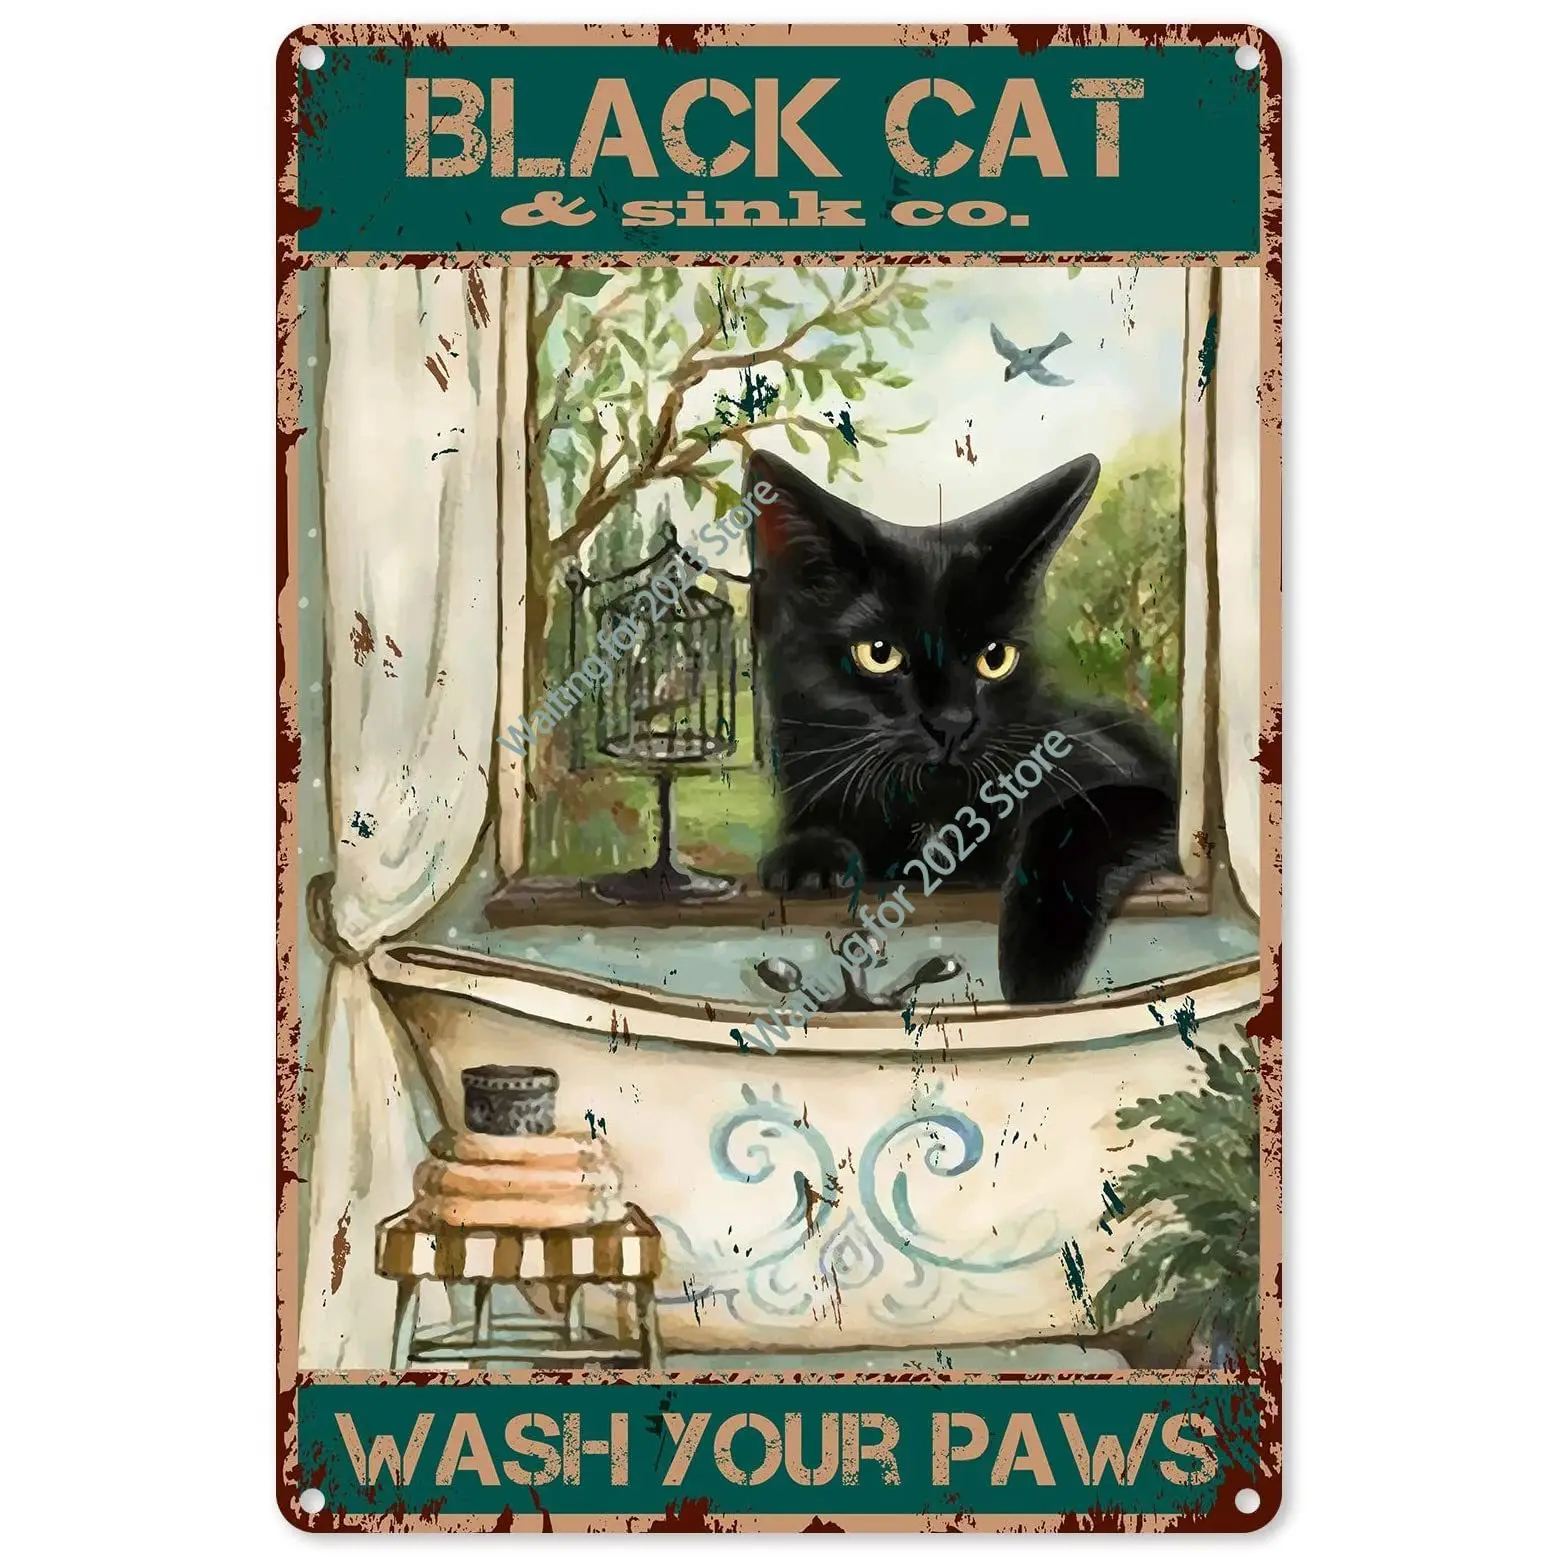 

Funny Bathroom Quote Metal Tin Sign Wall Decor - Vintage Black Cat Wash Your Paws Tin Sign for Office/Home/Classroom Bathroom